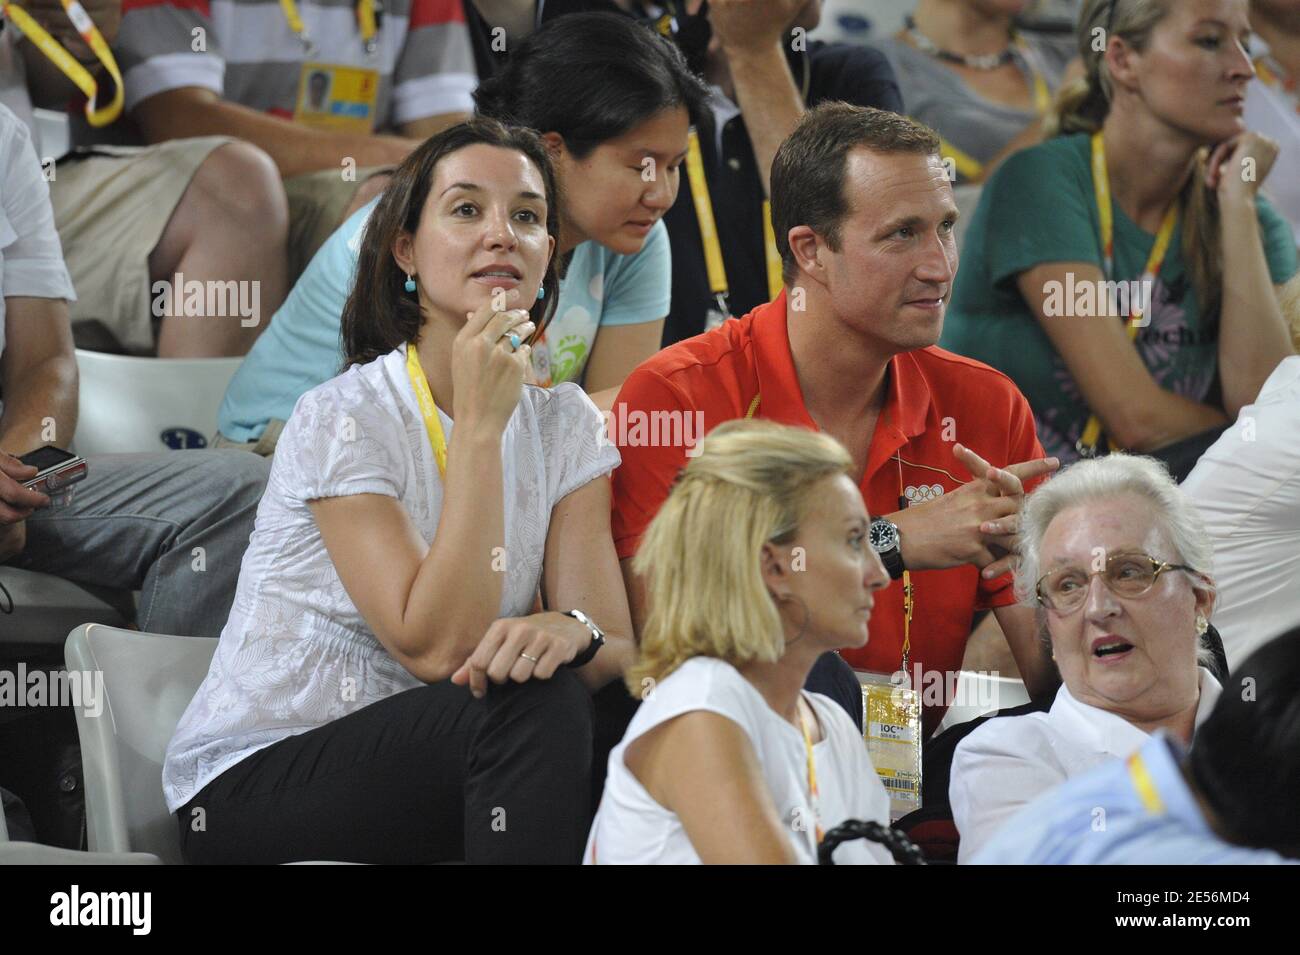 Princess Dona Pilar of Borbon with her son Bruno Gomez Acebo of Borbon and his girlfriend Barbara Cano De La Plaza watch the match Spain's Rafael Nadal against Australia's Lleyton Hewitt a men's singles second round tennis match for the 2008 Beijing Olympic Games on August 12, 2008. Photo by Gouhier/Hahn/Nebinger/ABACAPRESS.COM Stock Photo